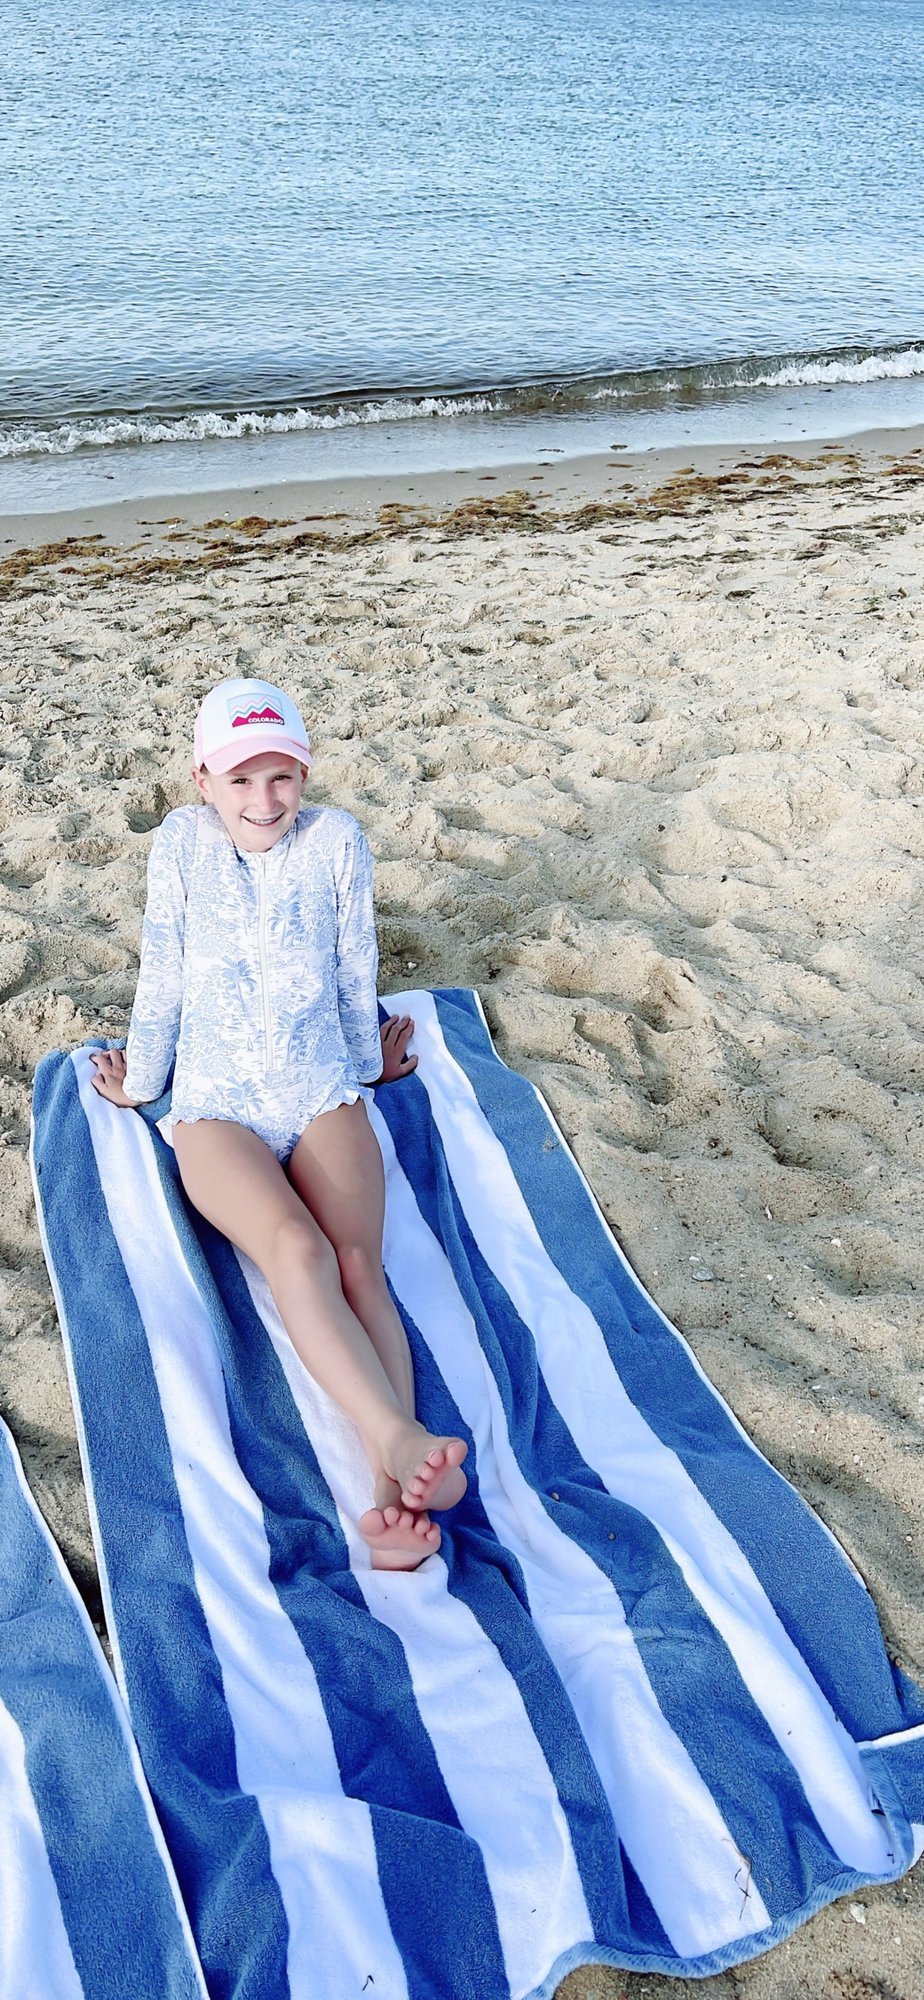 A little girl on a blue and white striped towel on a martha's vineyard beach